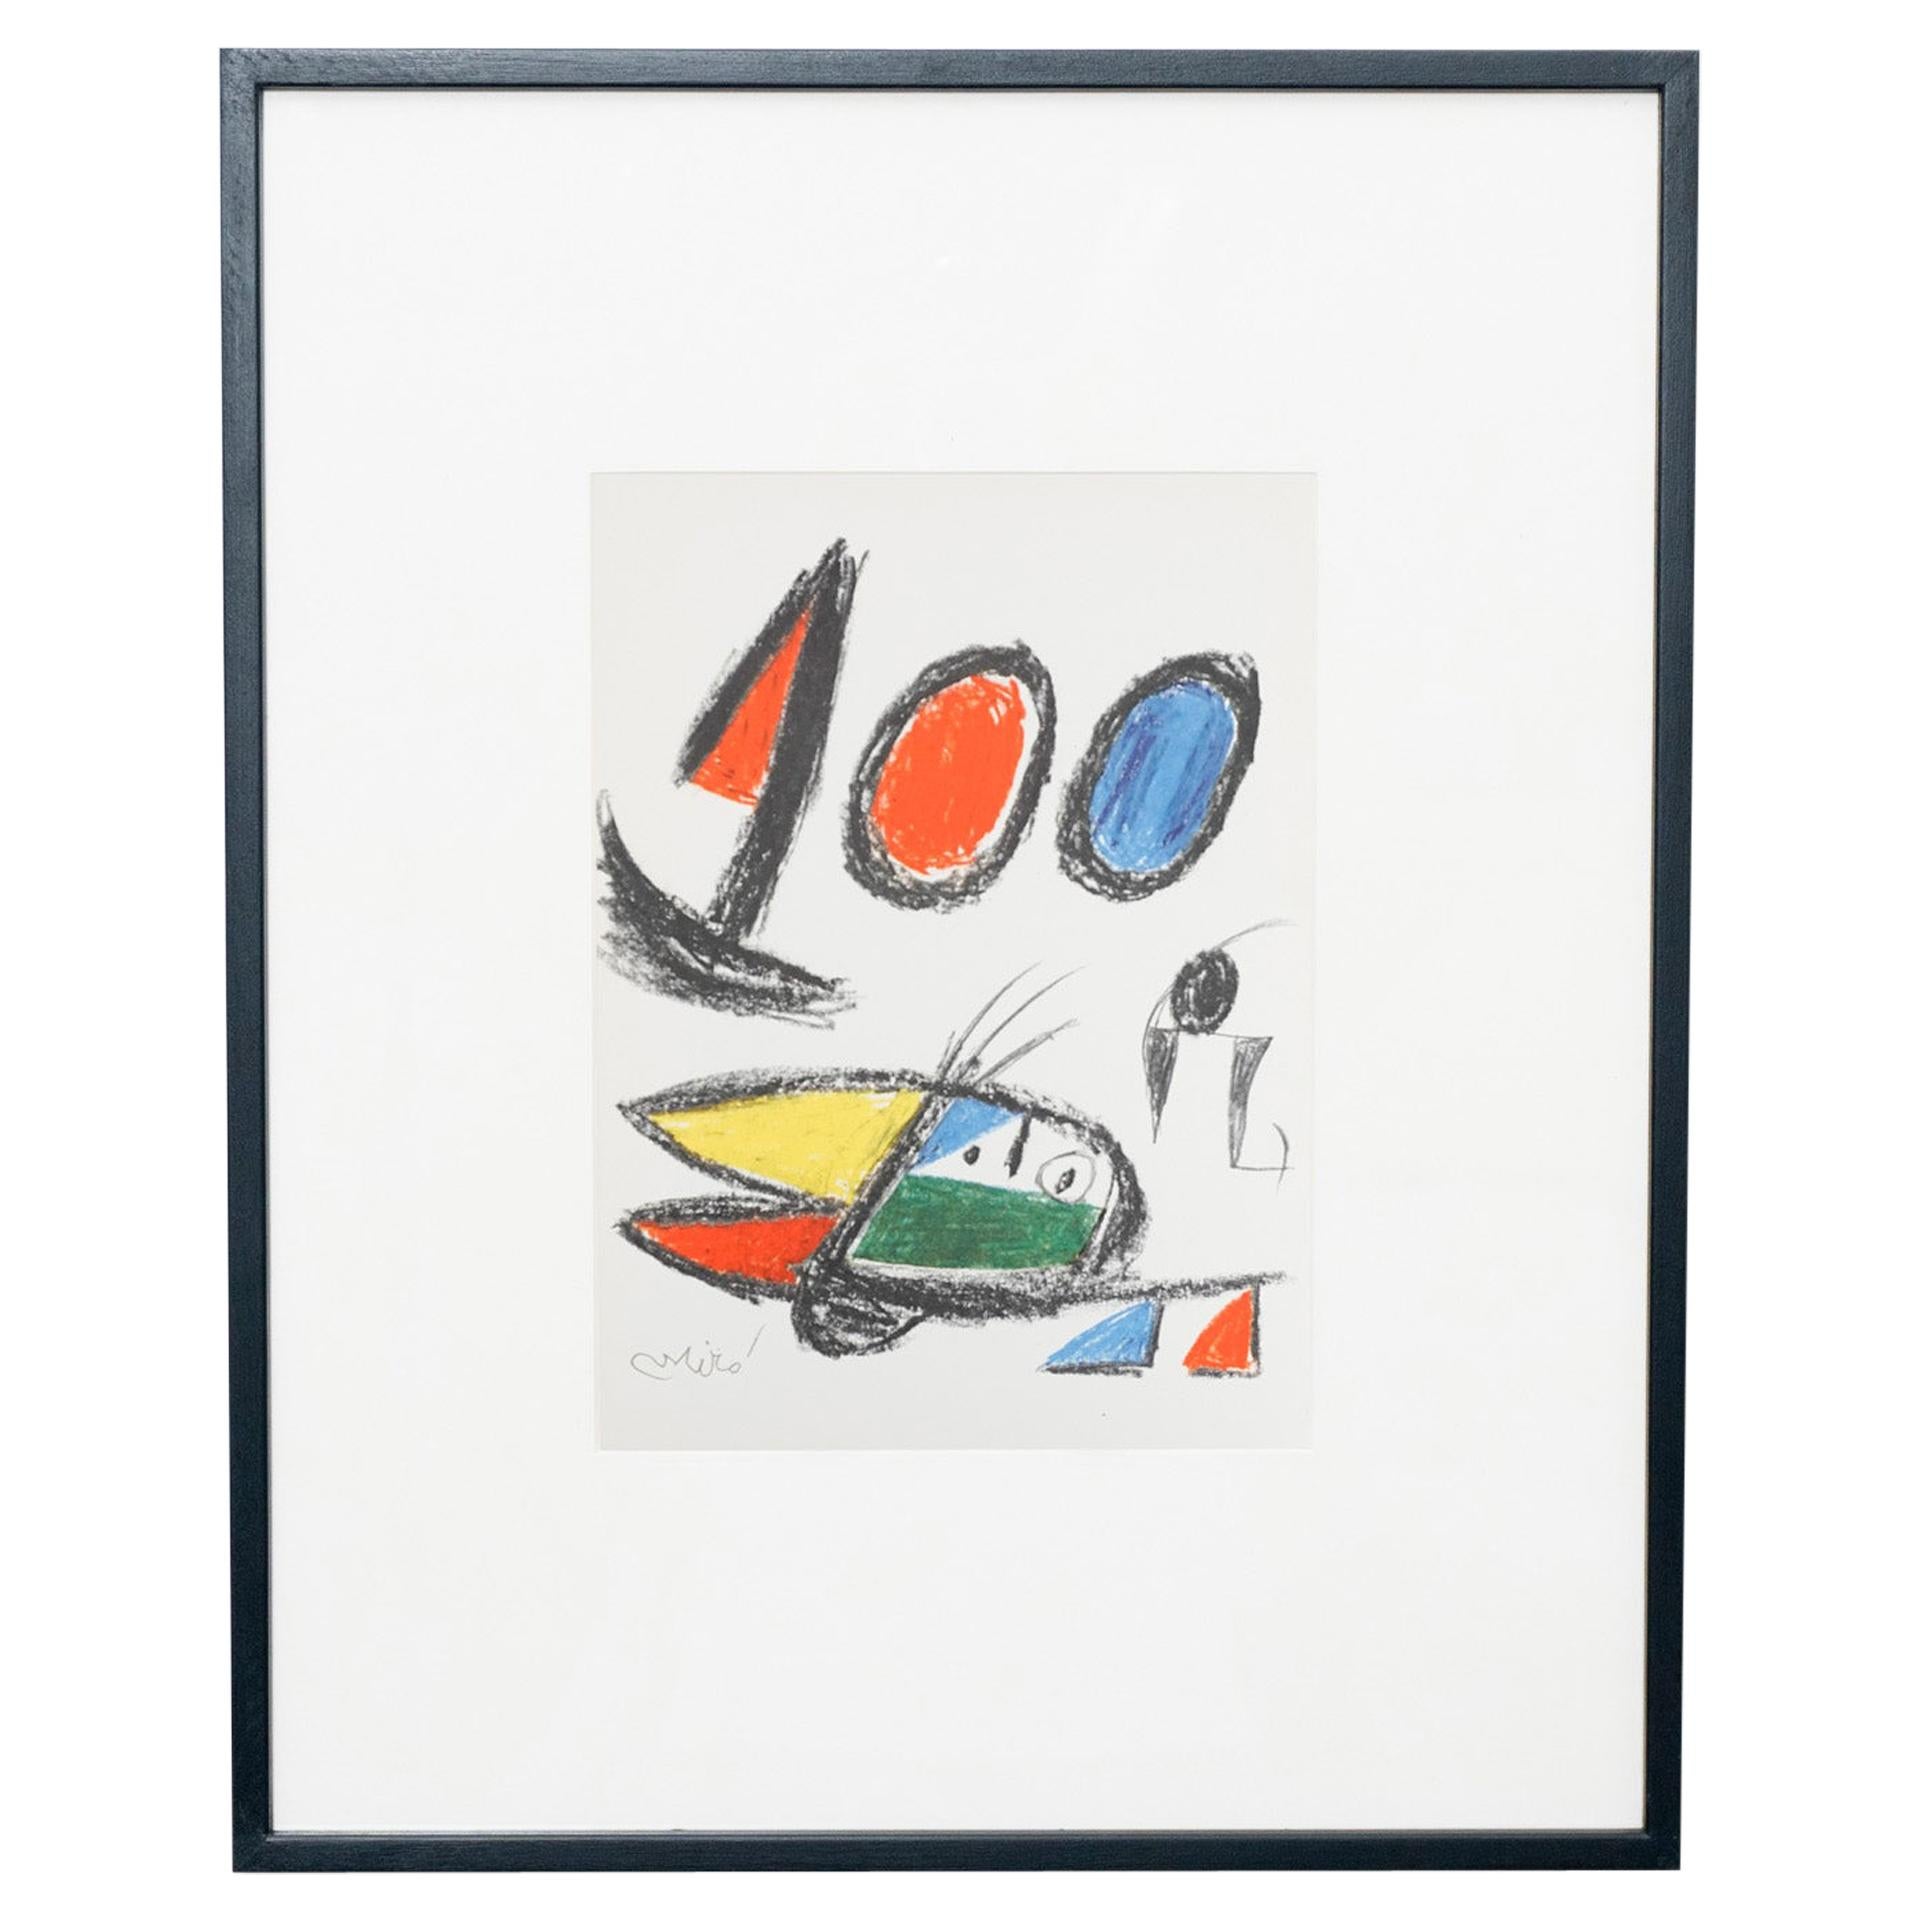 Miró, Limited Edition Photolithography, circa 1970